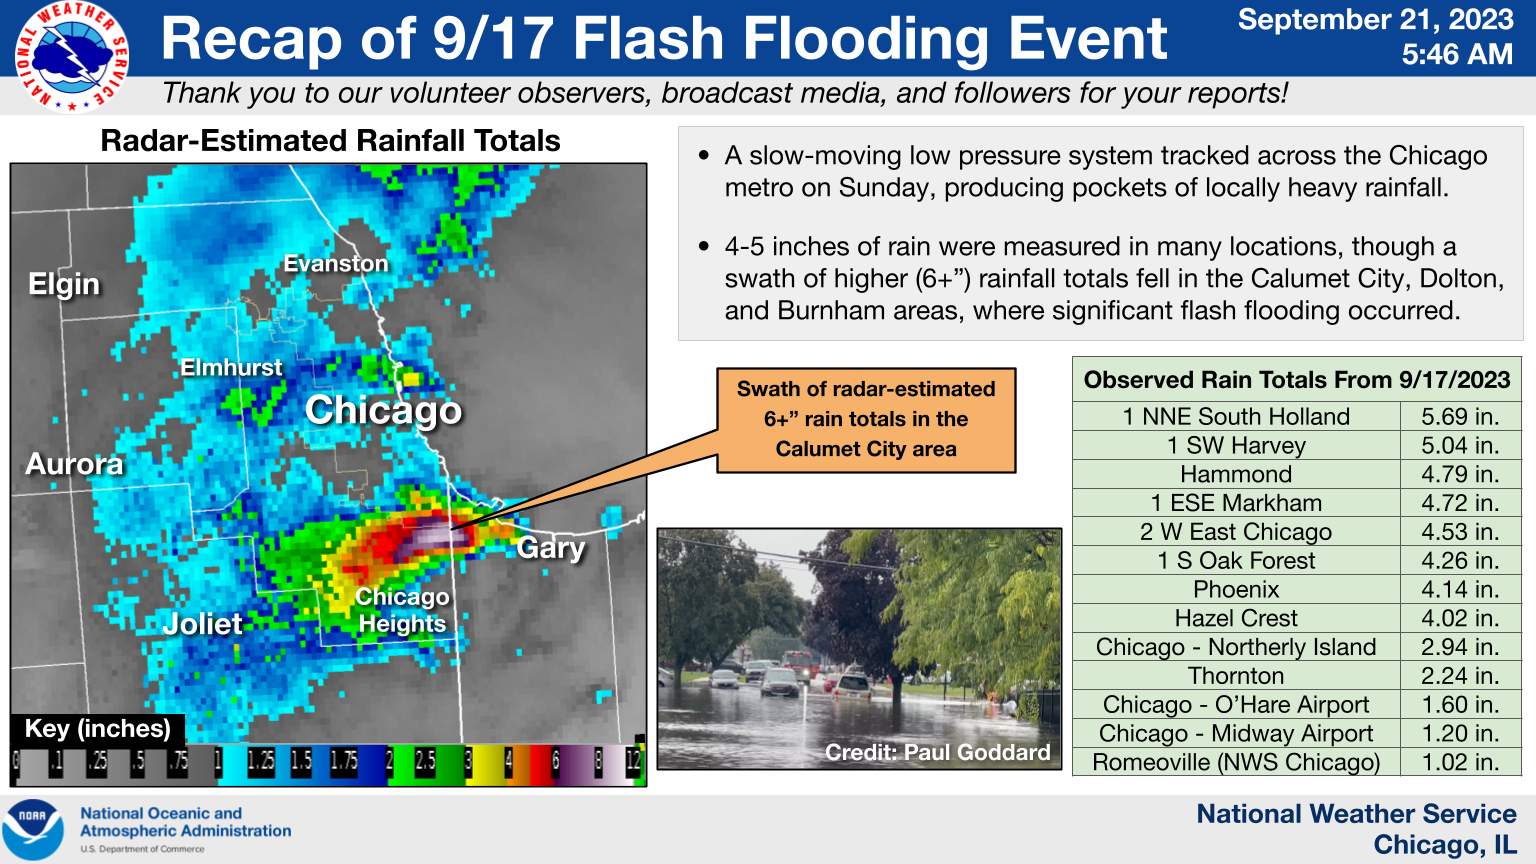 Overview Graphic for the September 17 Flash Flooding Event